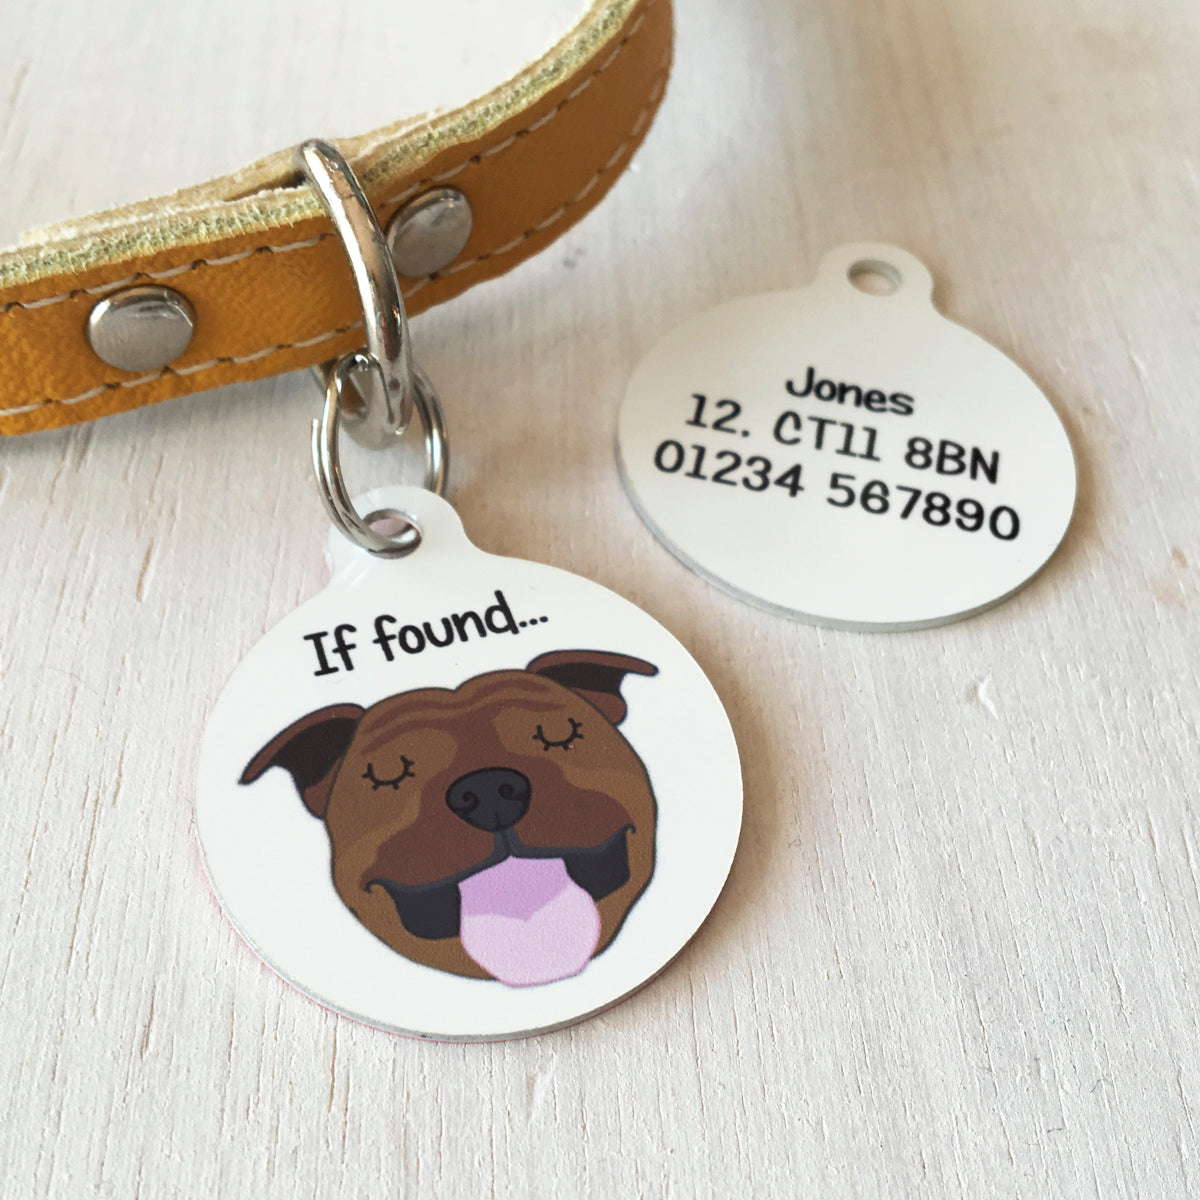 Bauble Pet ID Tag (old style)